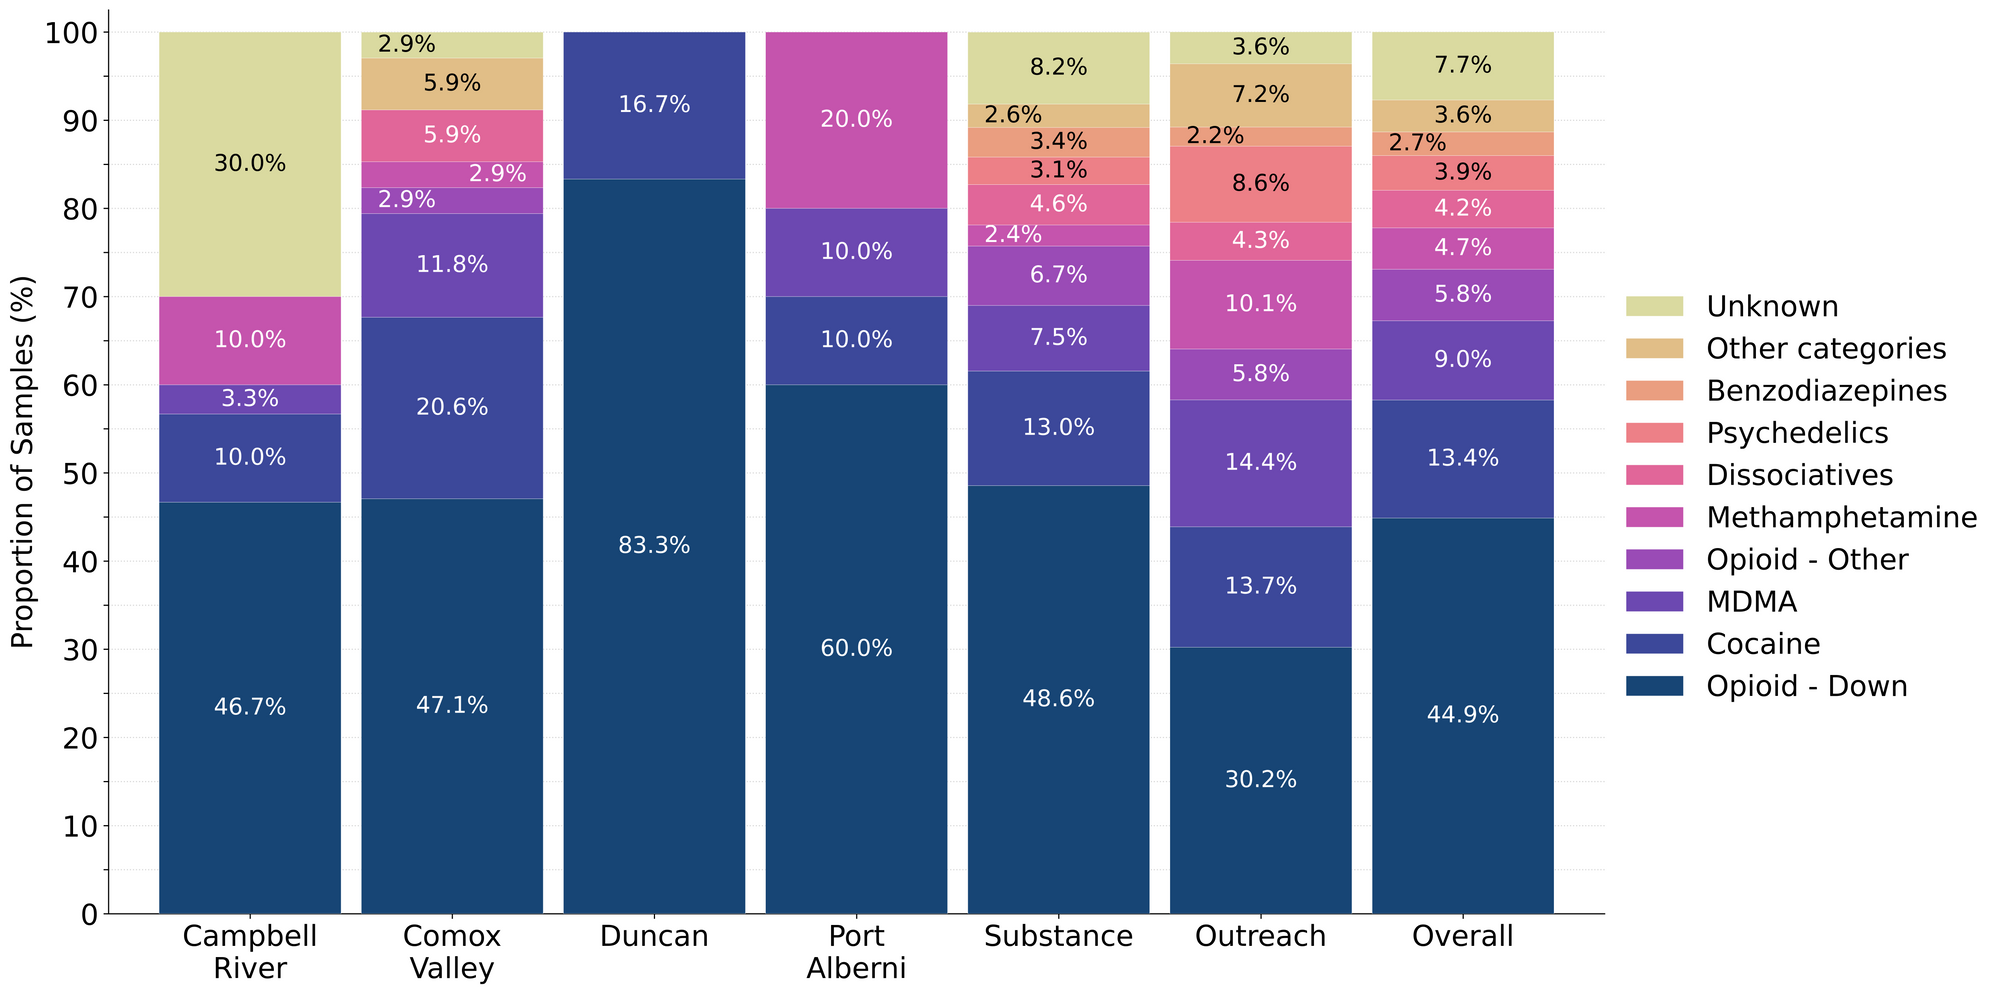 Figure 1. Prevalence of drug classes checked during January split by sample collection/method. Bars are stacked by the percentage of samples in each drug class, with the individual percentages overlaid. Drug classes which represent less than 1% of a given location’s total do not have their percent overlaid onto the bar.